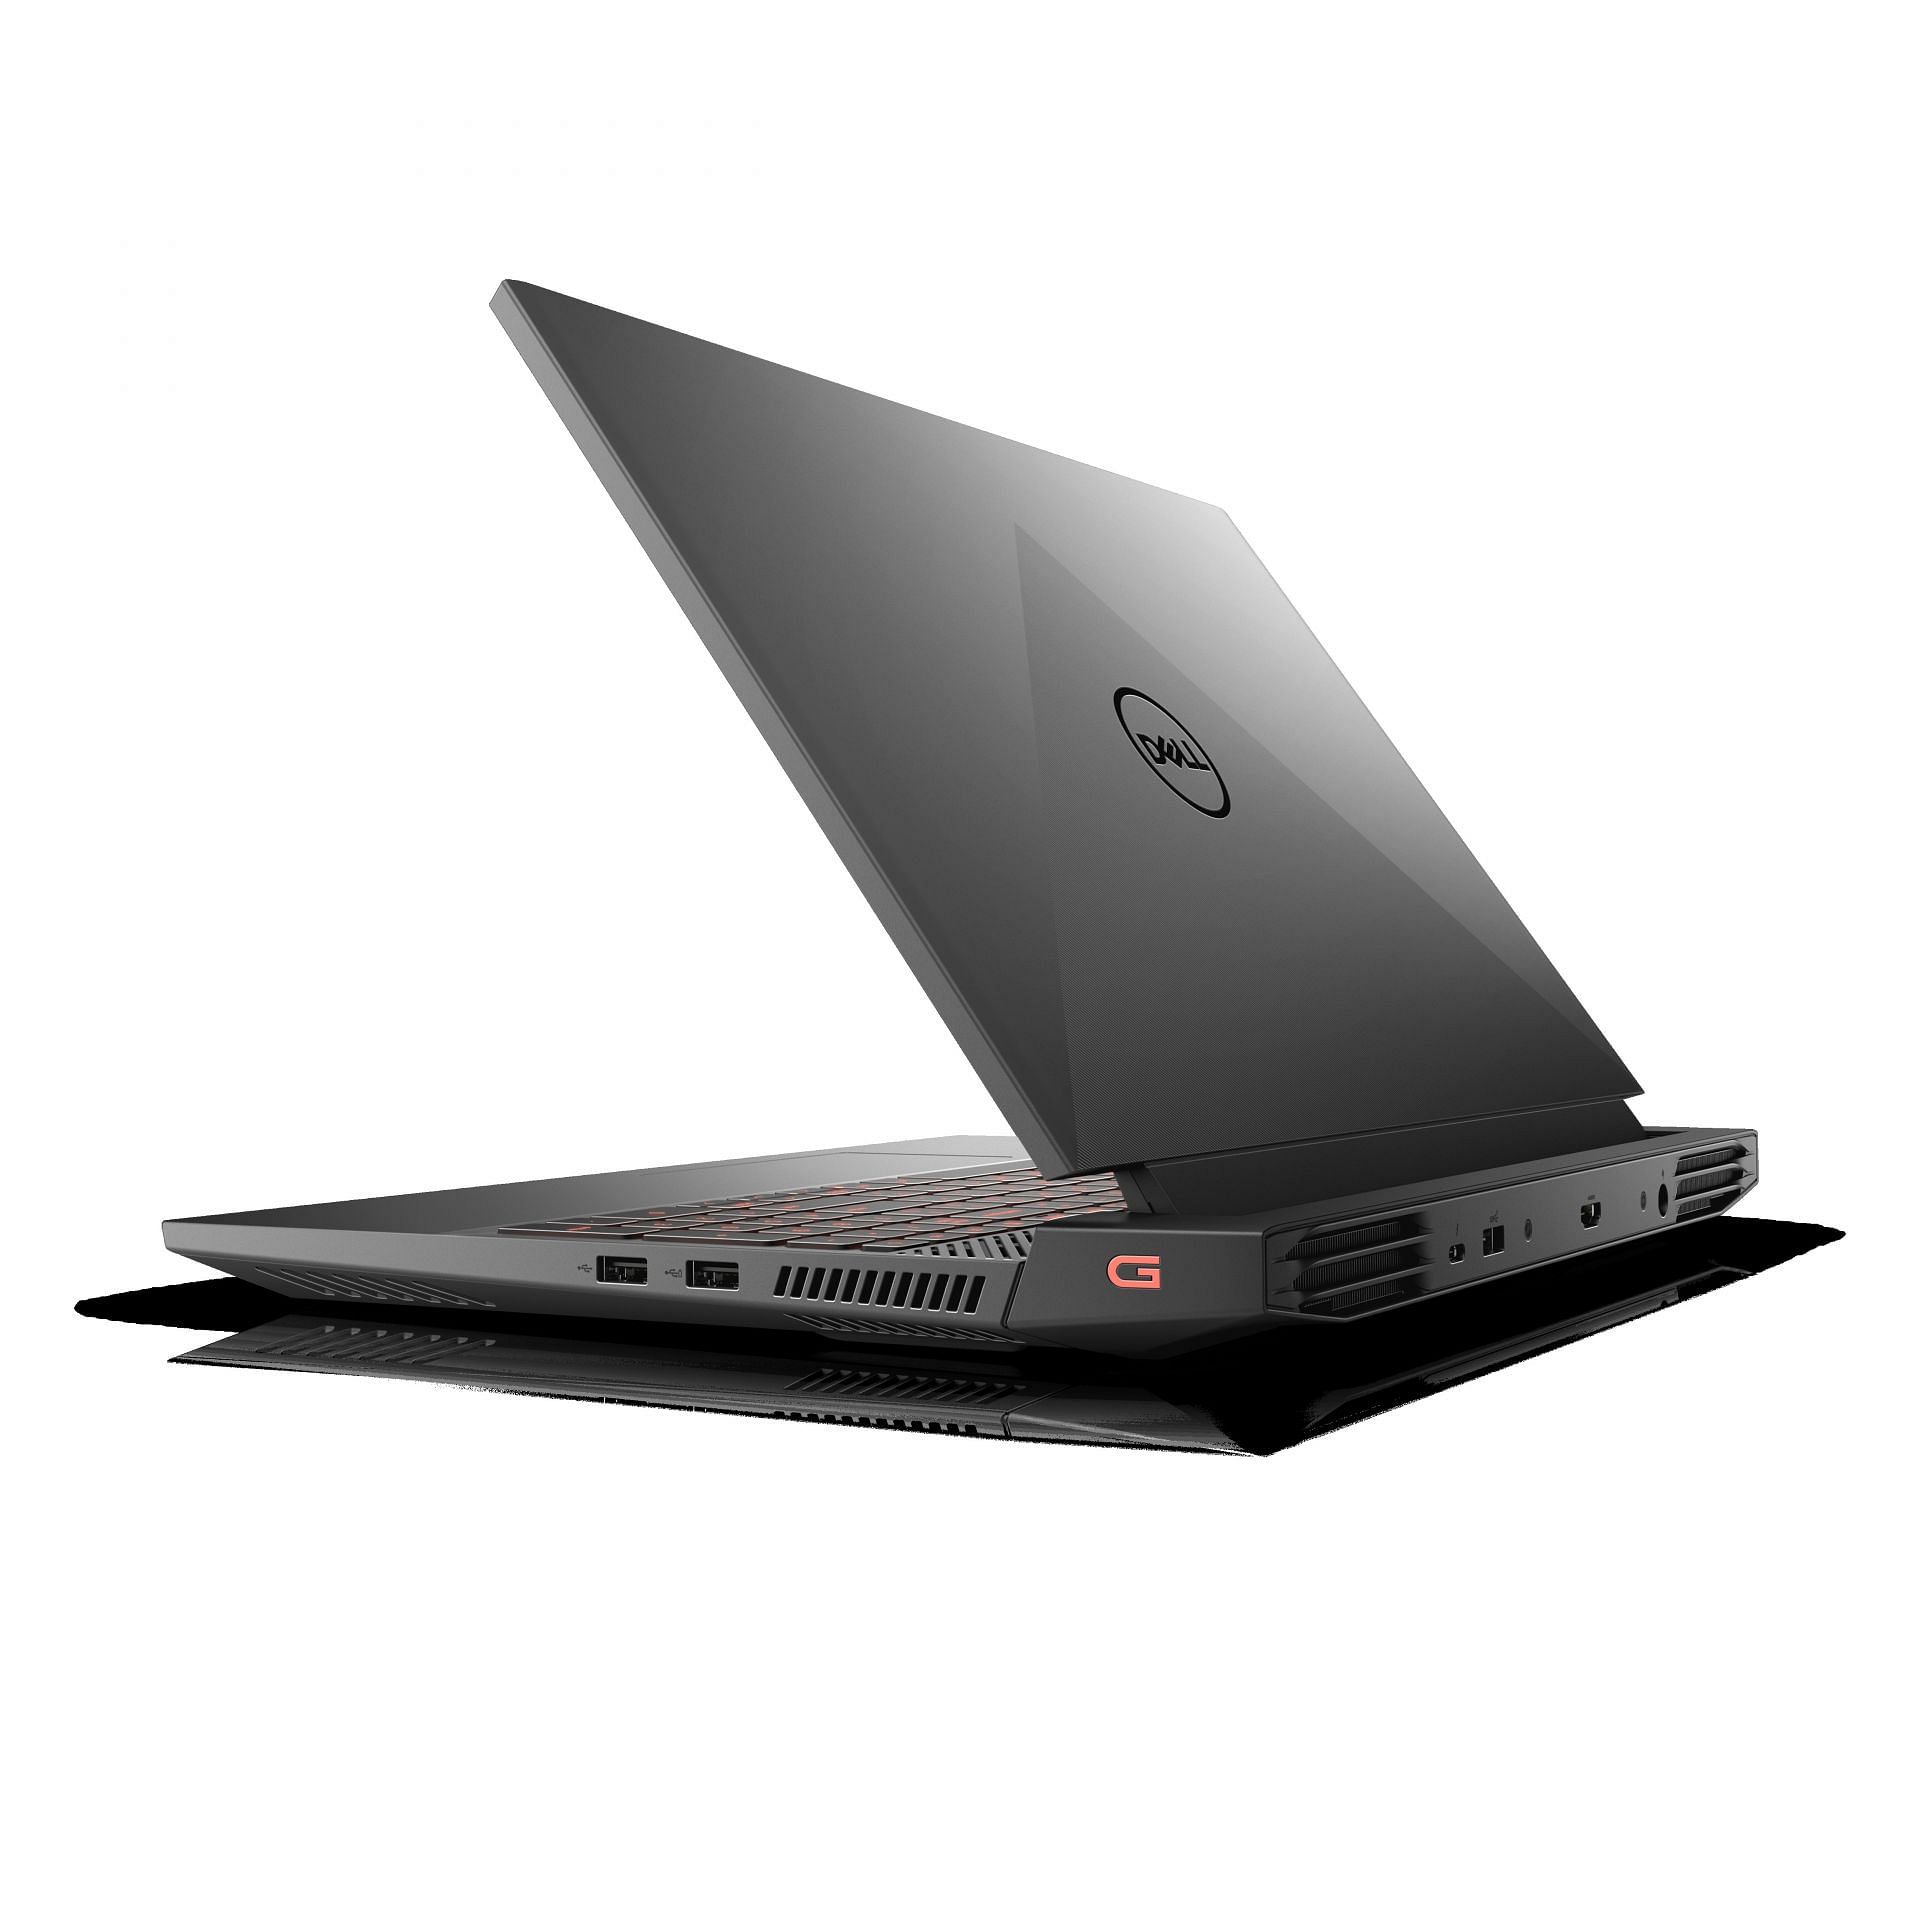 The Dell G15 Gaming Laptop (Image via Dell)